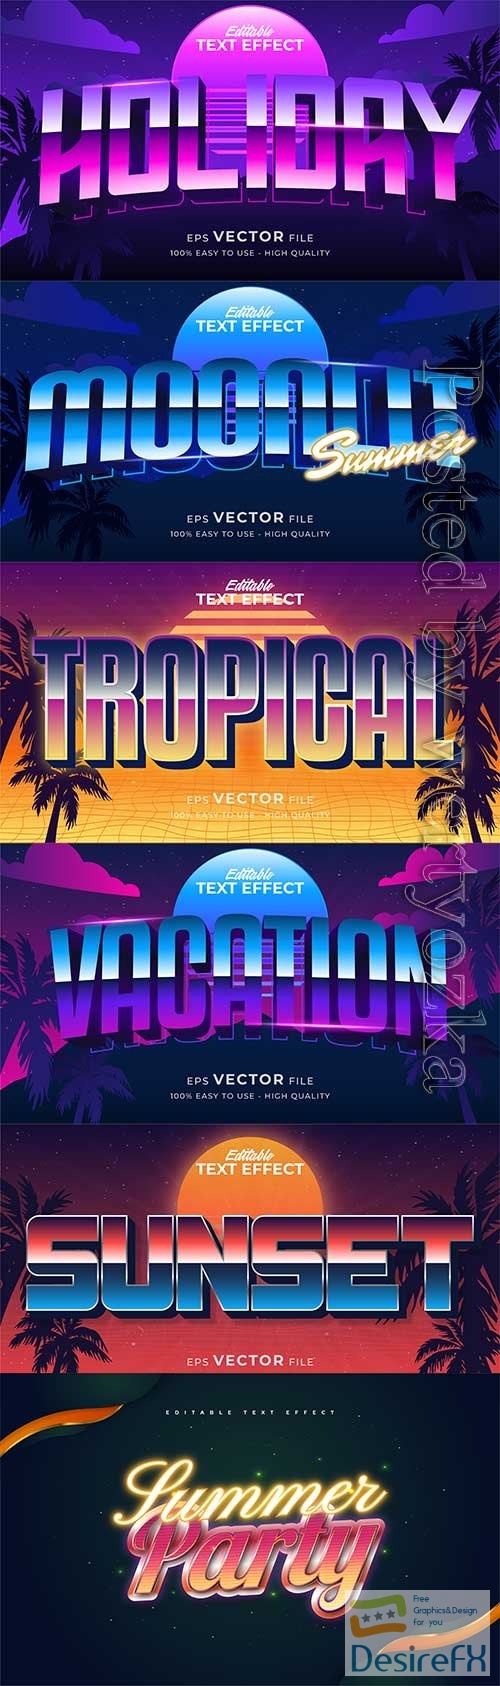 Retro summer holiday text in grunge style theme in vector vol 17